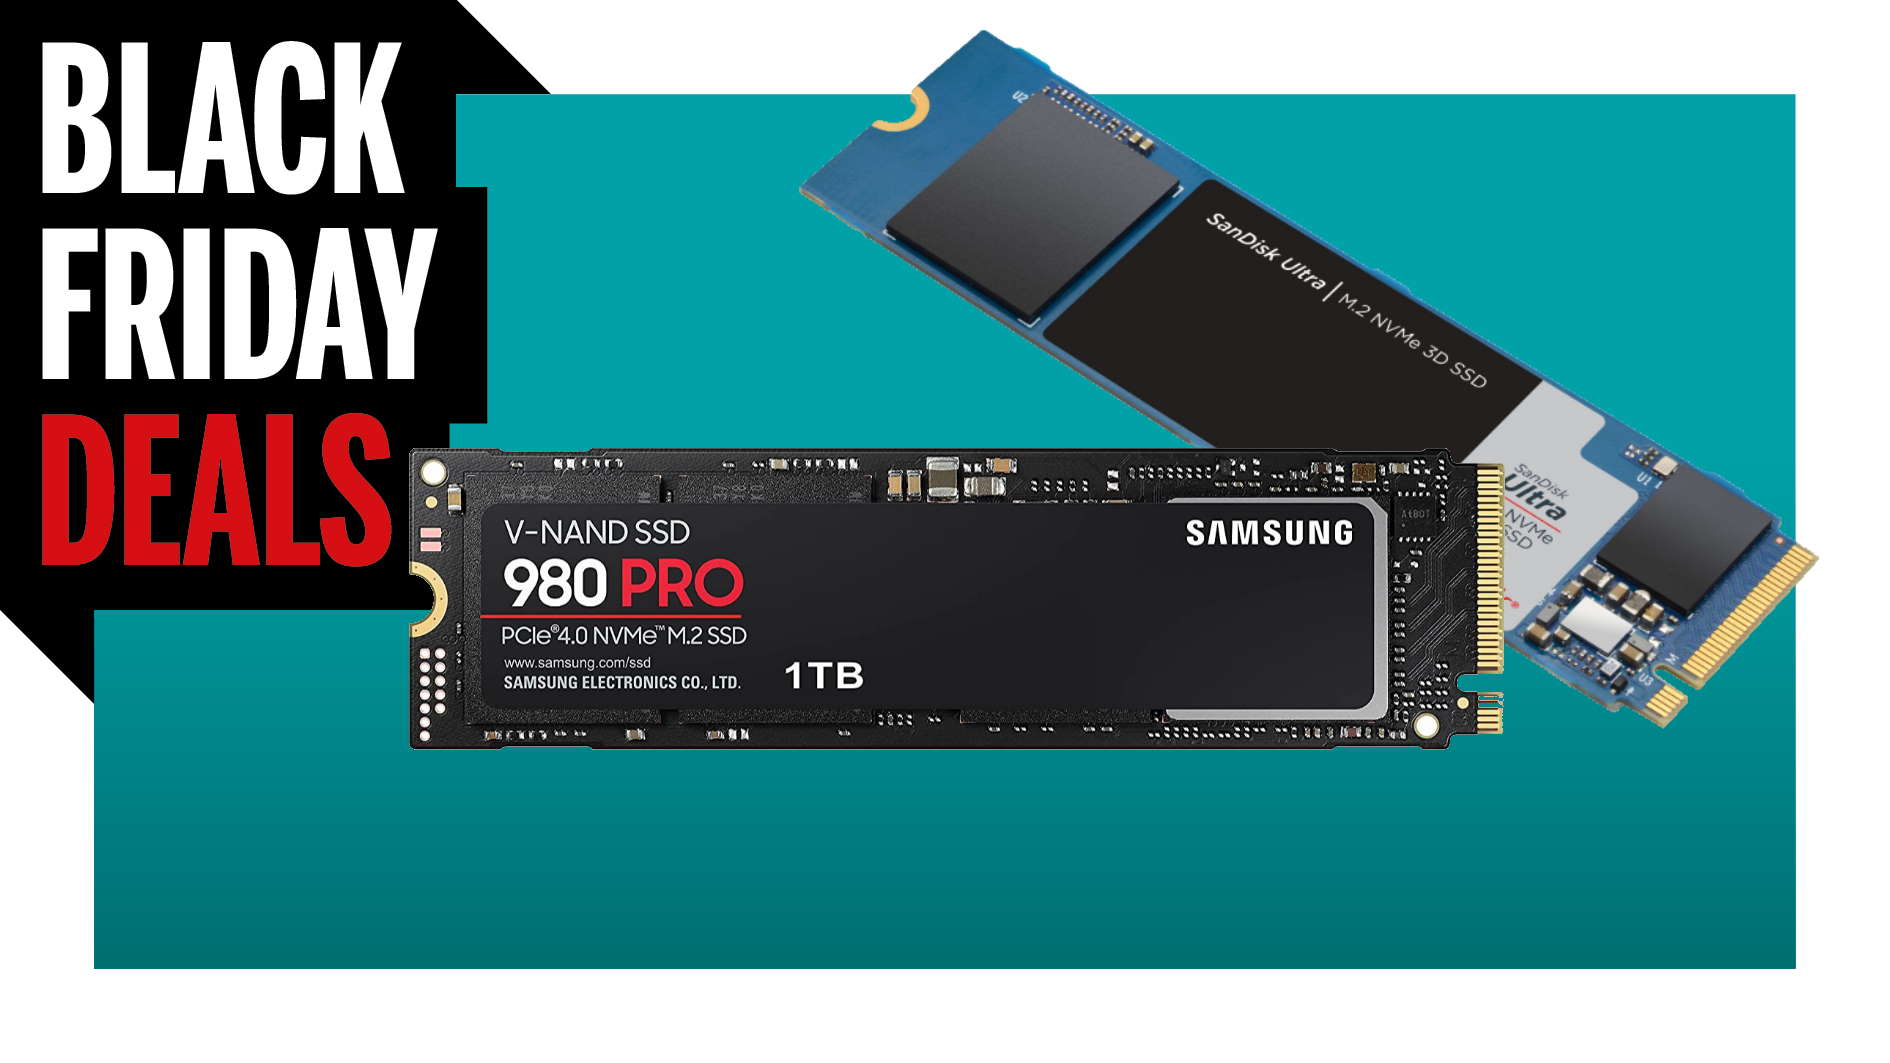  All the bargains are in... and this is still the best 1TB Black Friday SSD deal today 